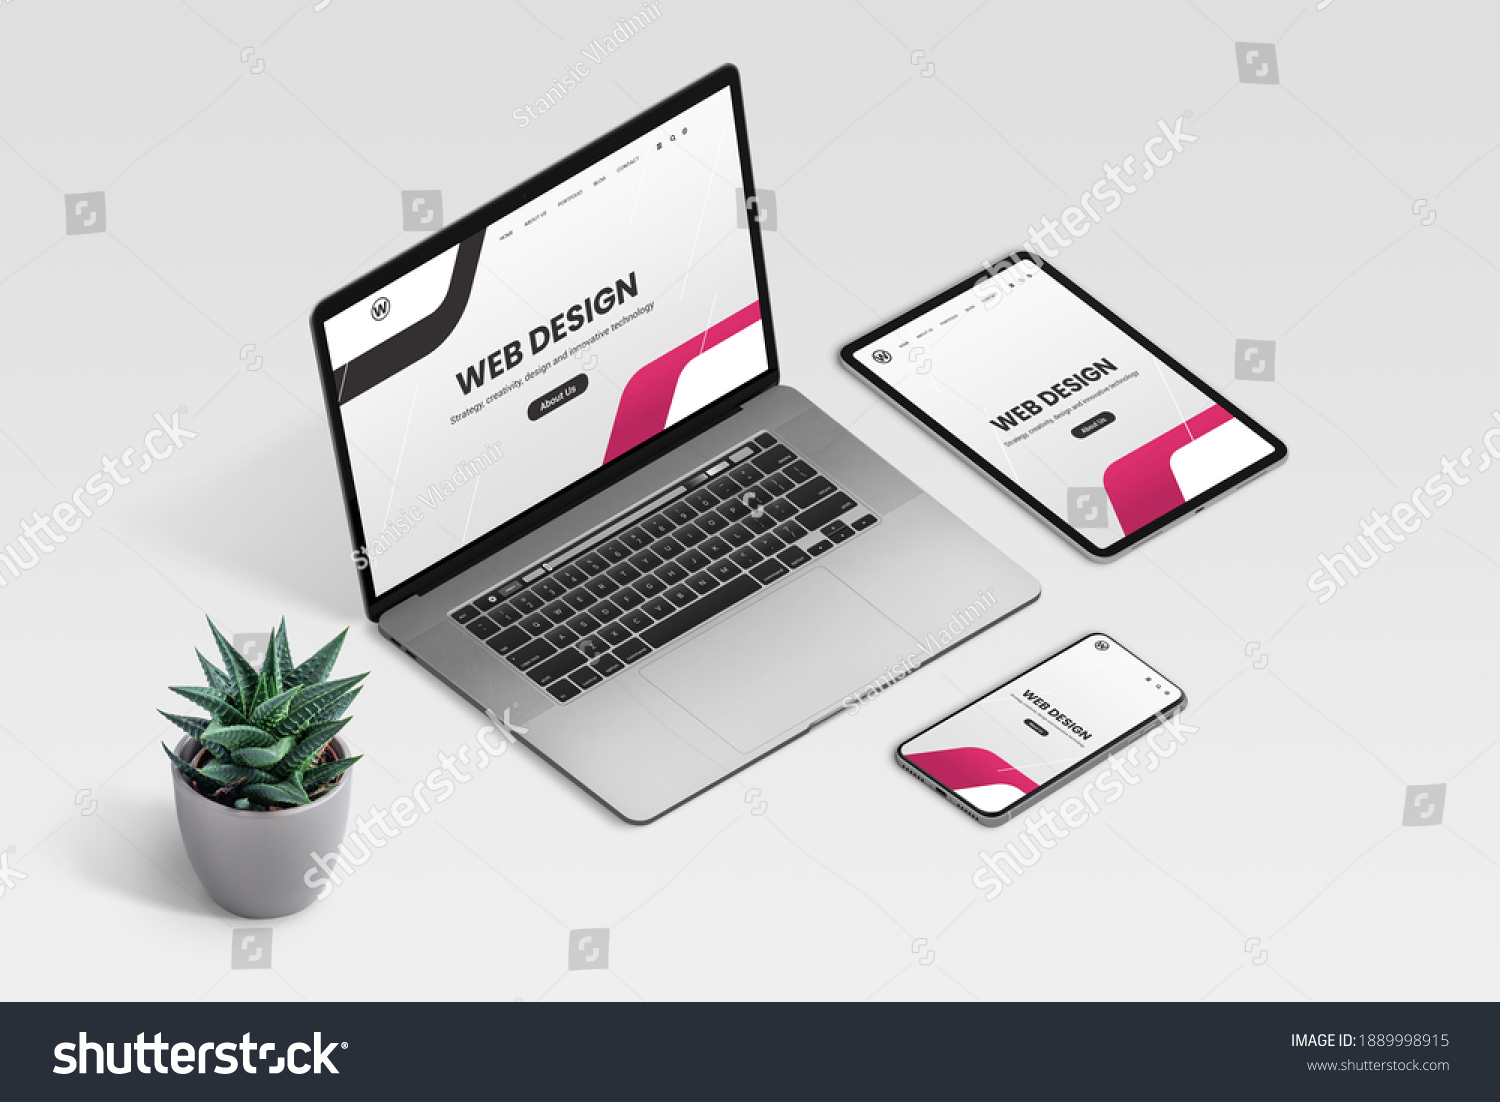 Web design studio promo page on laptop, tablet and phone display concept. Isometric view of desk with plant decoration #1889998915